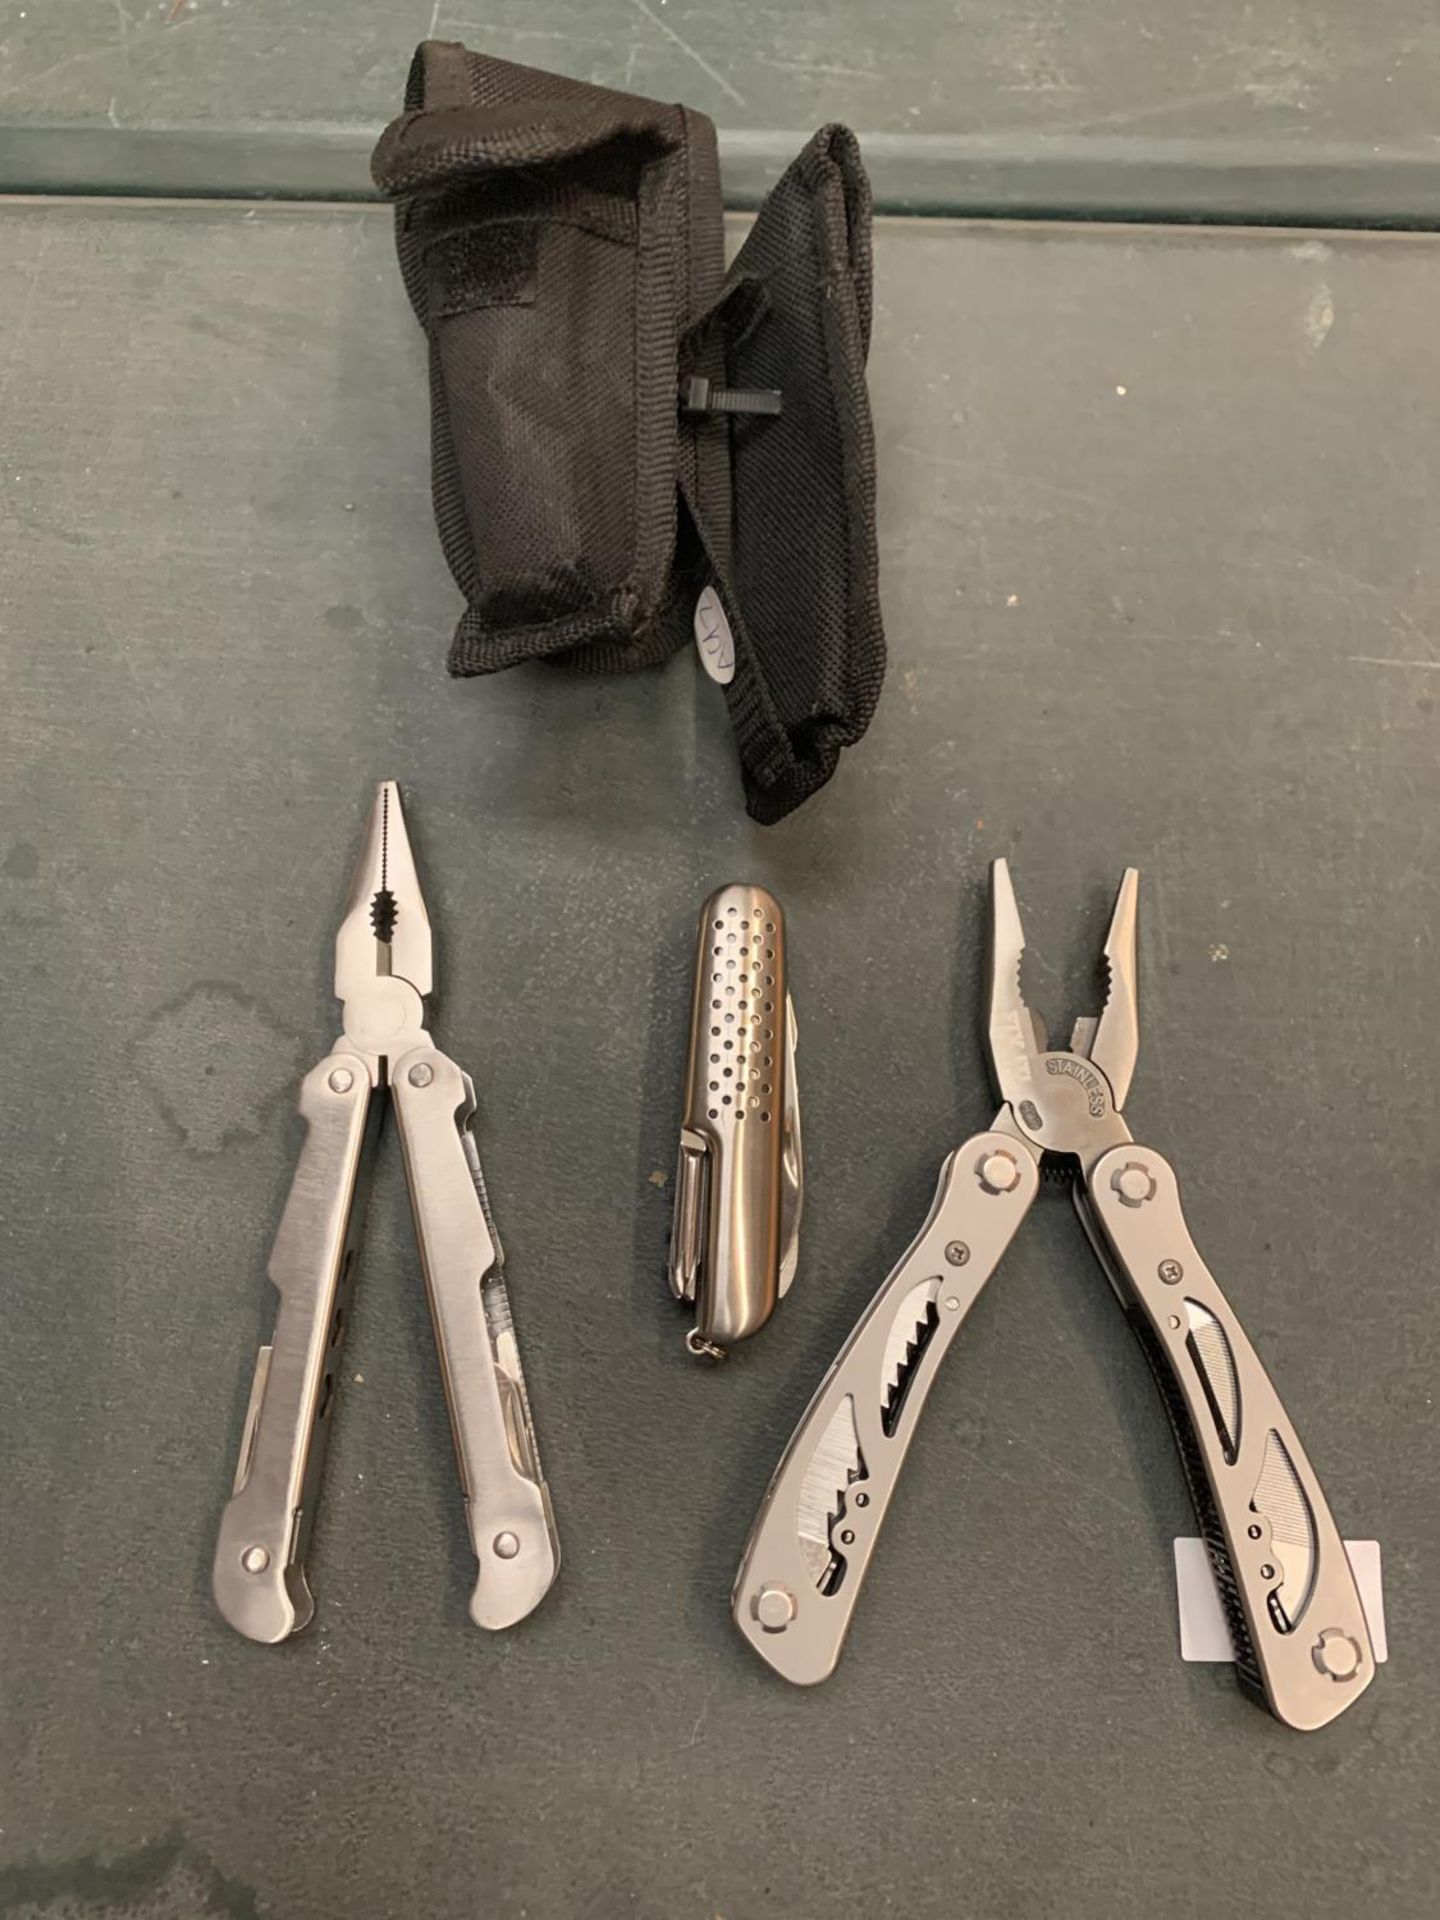 THREE CASED ITEMS TO INCLUDE AN INTERCRAFT MULTI TOOL, A FIX IT MULTI TOOL AND A PENKNIFE - Image 2 of 2